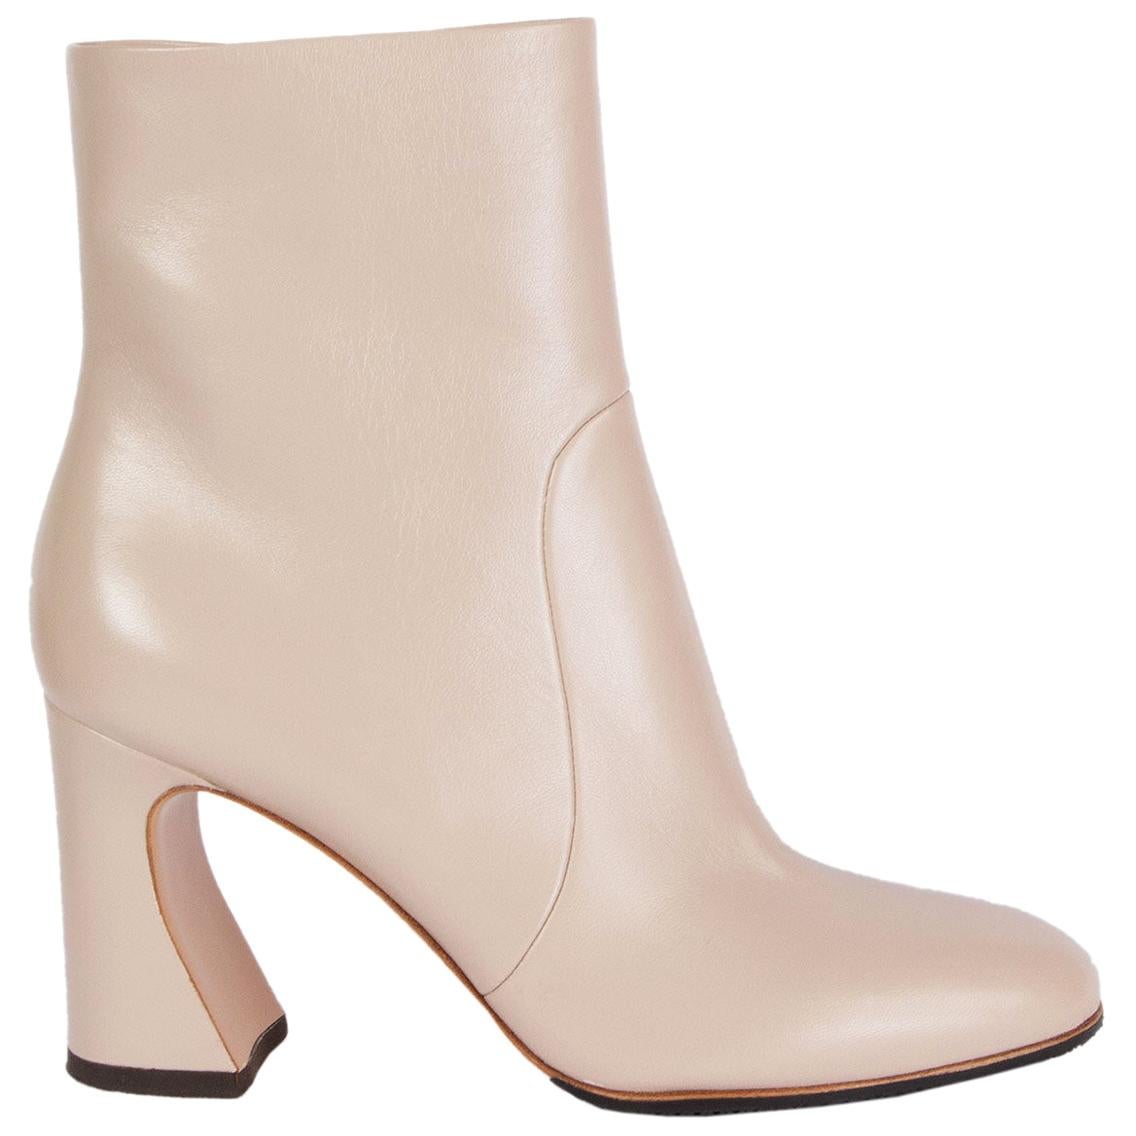 GIANVITO ROSSI nude leather CURVE 85 Ankle Boots Shoes 38.5